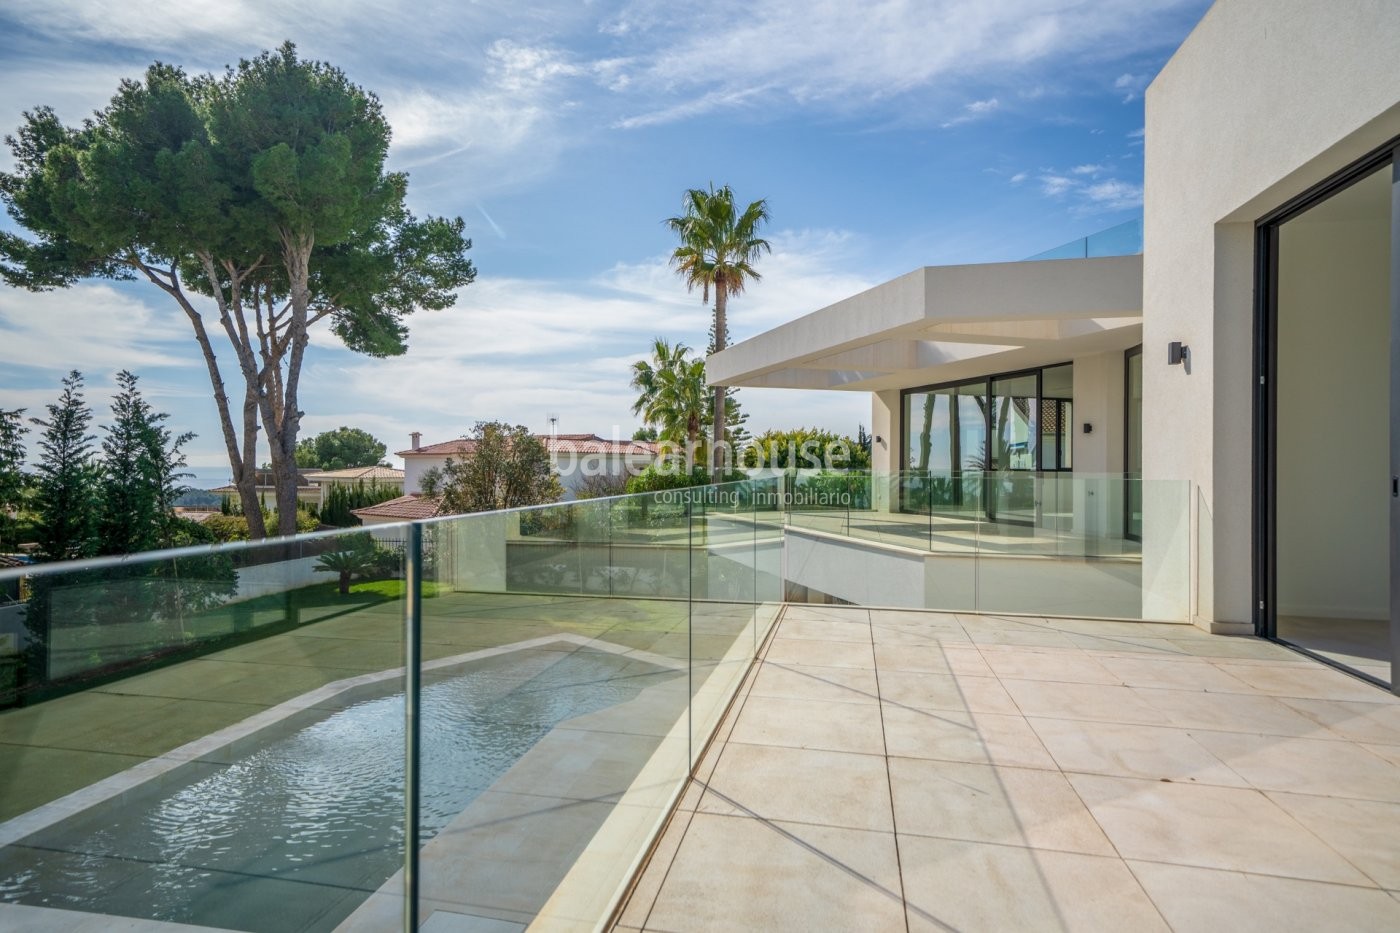 Design and light-filled spaces in this newly built villa with sea views in Cas Catalá.